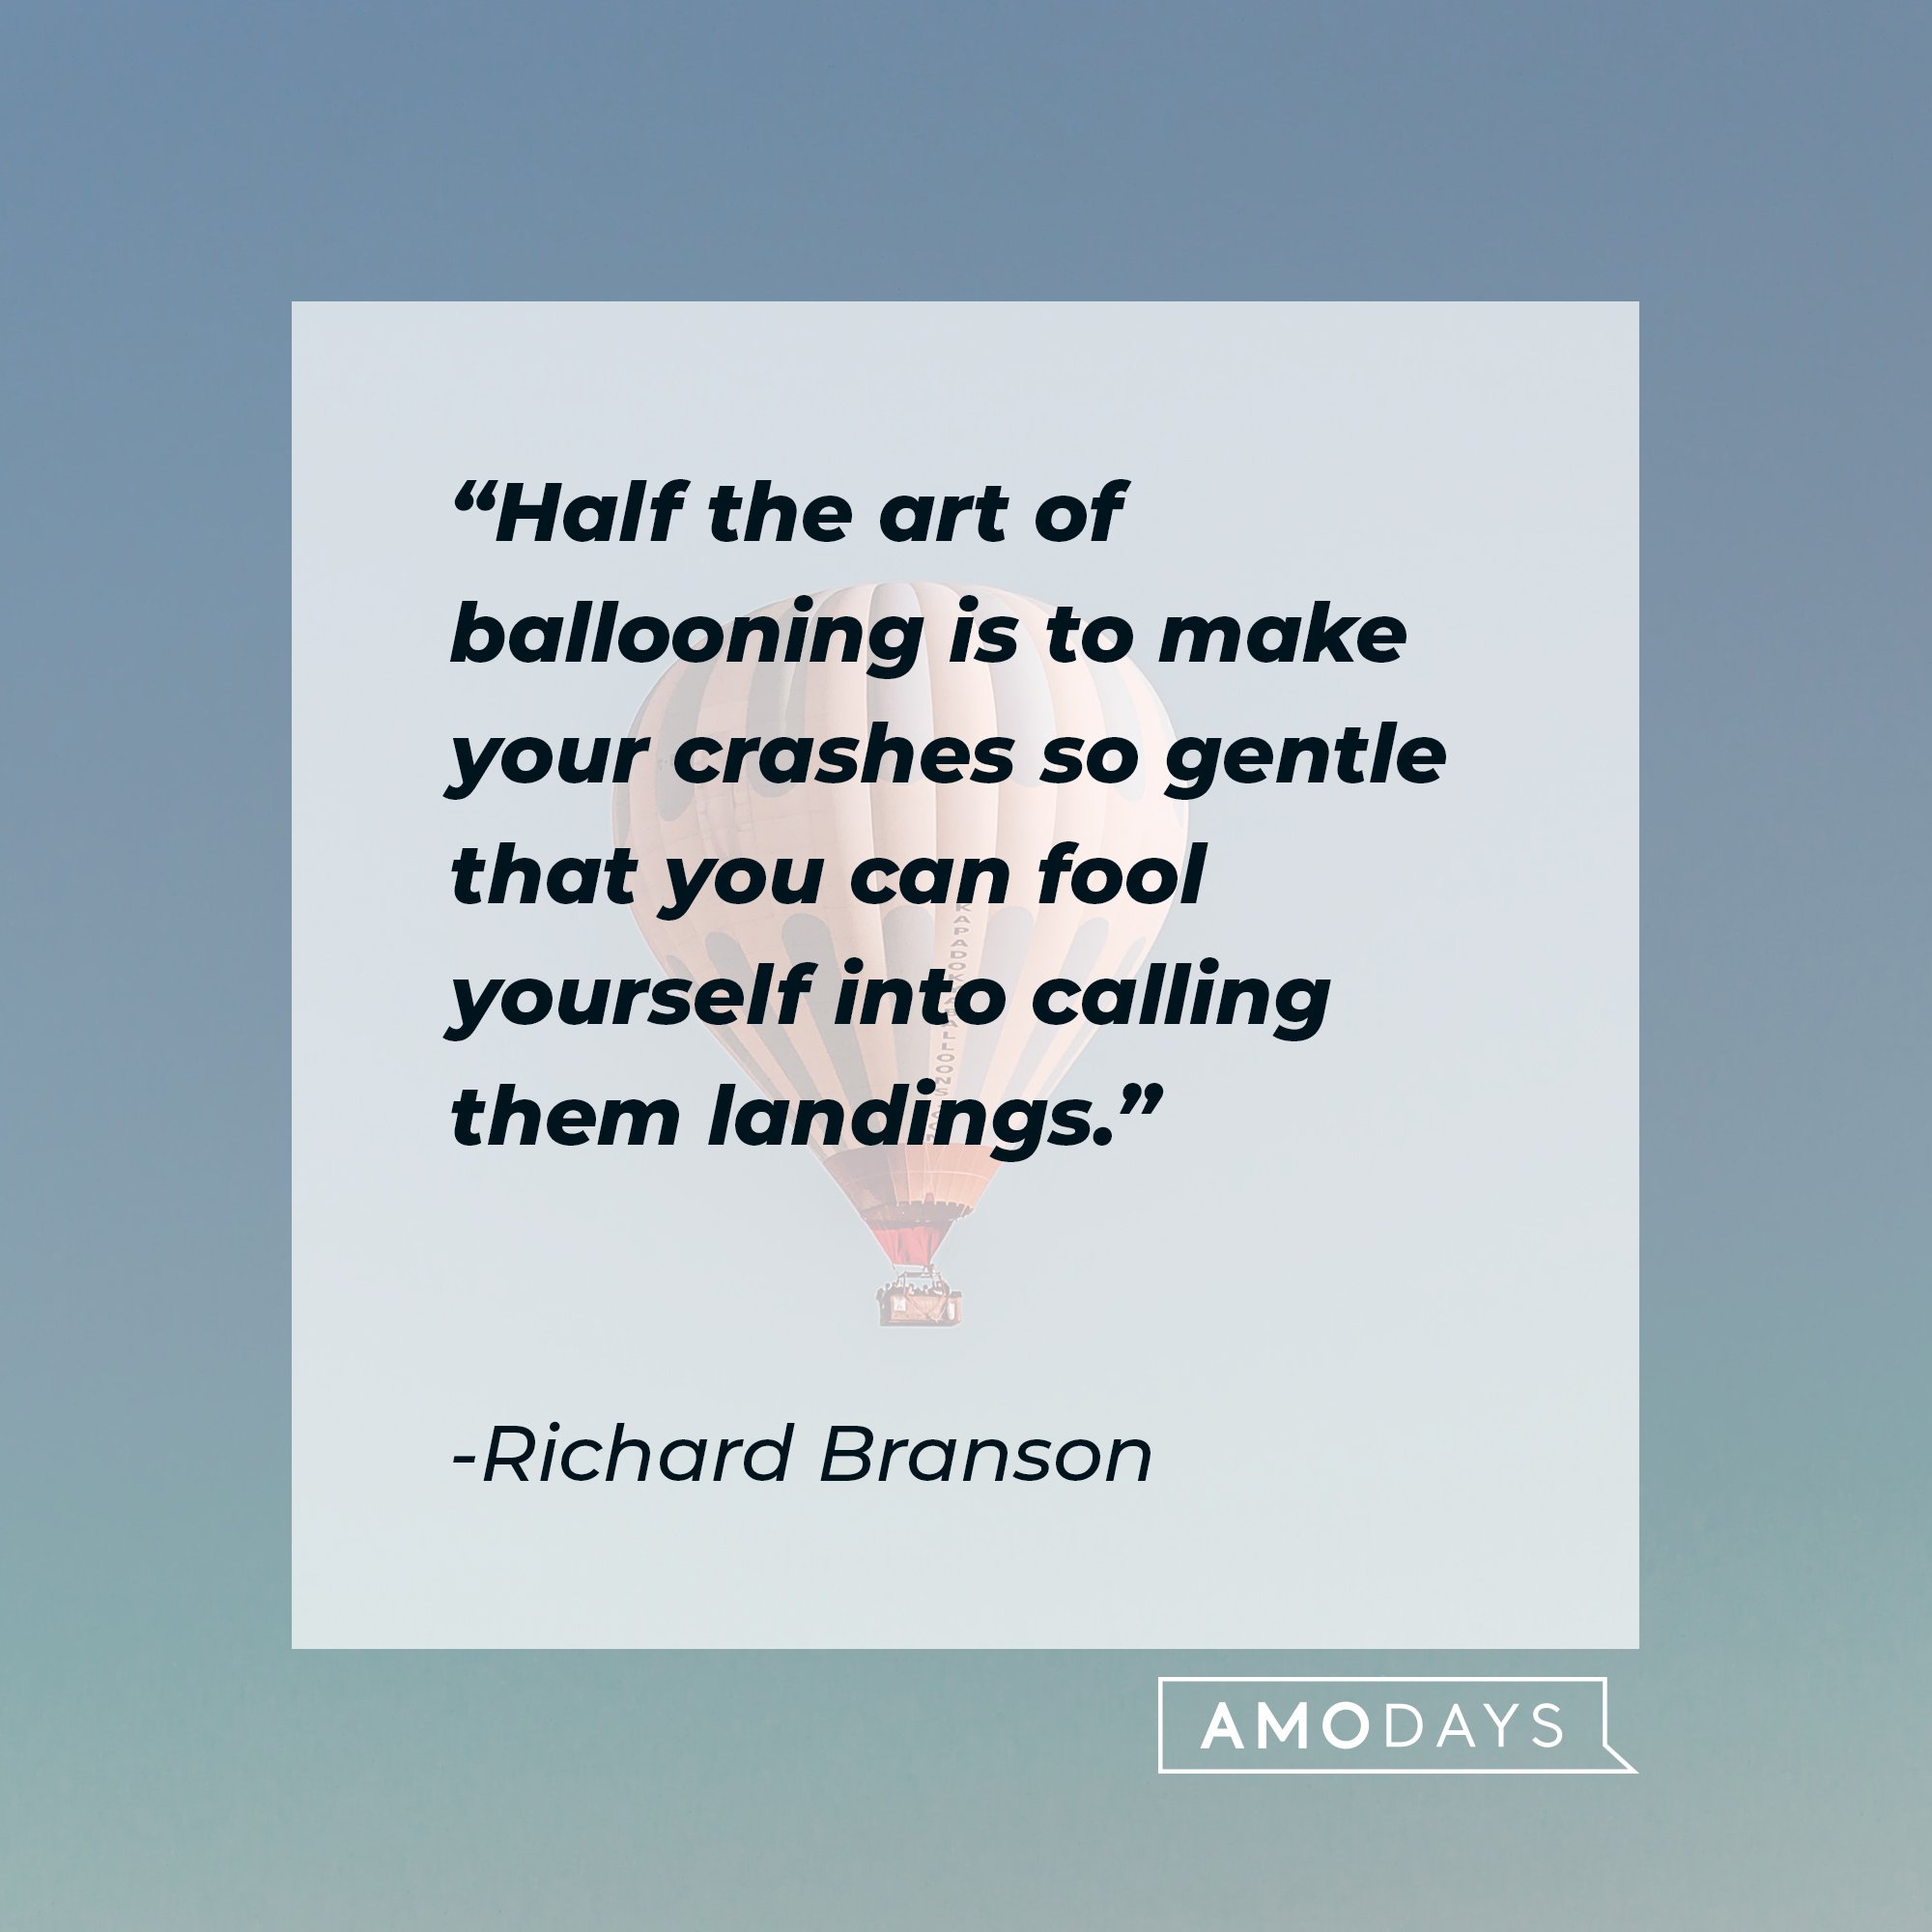 Richard Branson’s quote: "Half the art of ballooning is to make your crashes so gentle that you can fool yourself into calling them landings." | Image: AmoDays 